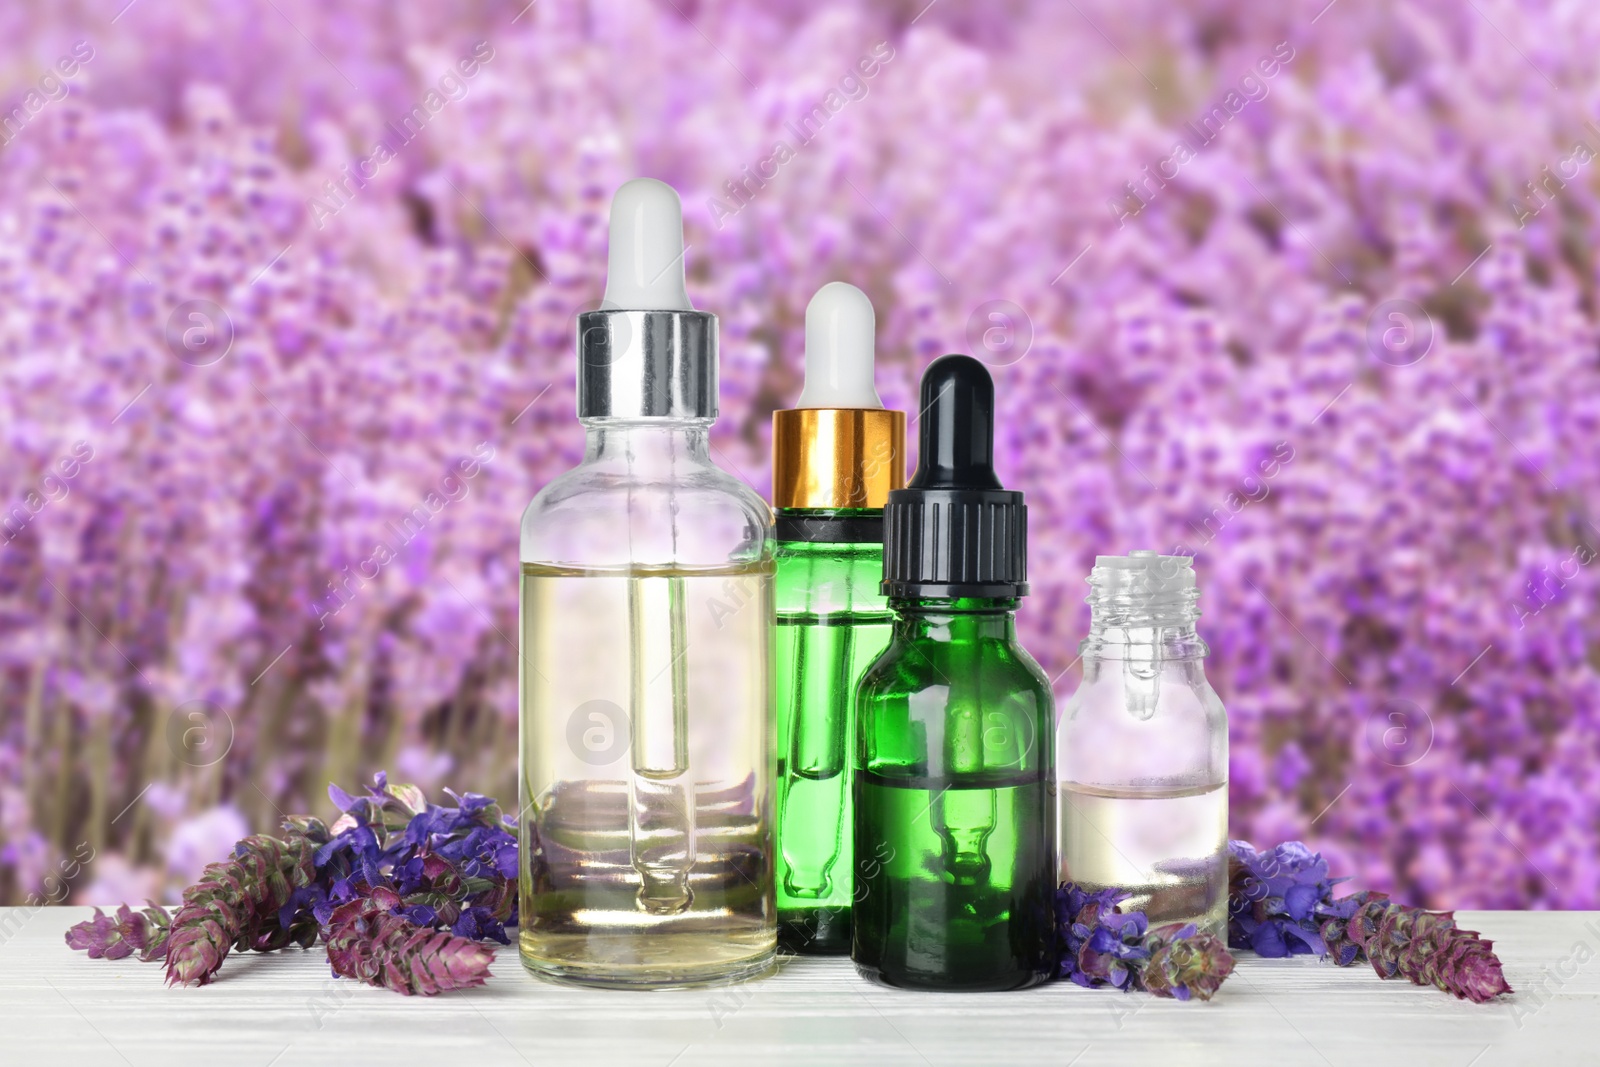 Image of Bottles of essential oils and wildflowers on wooden table against blurred background